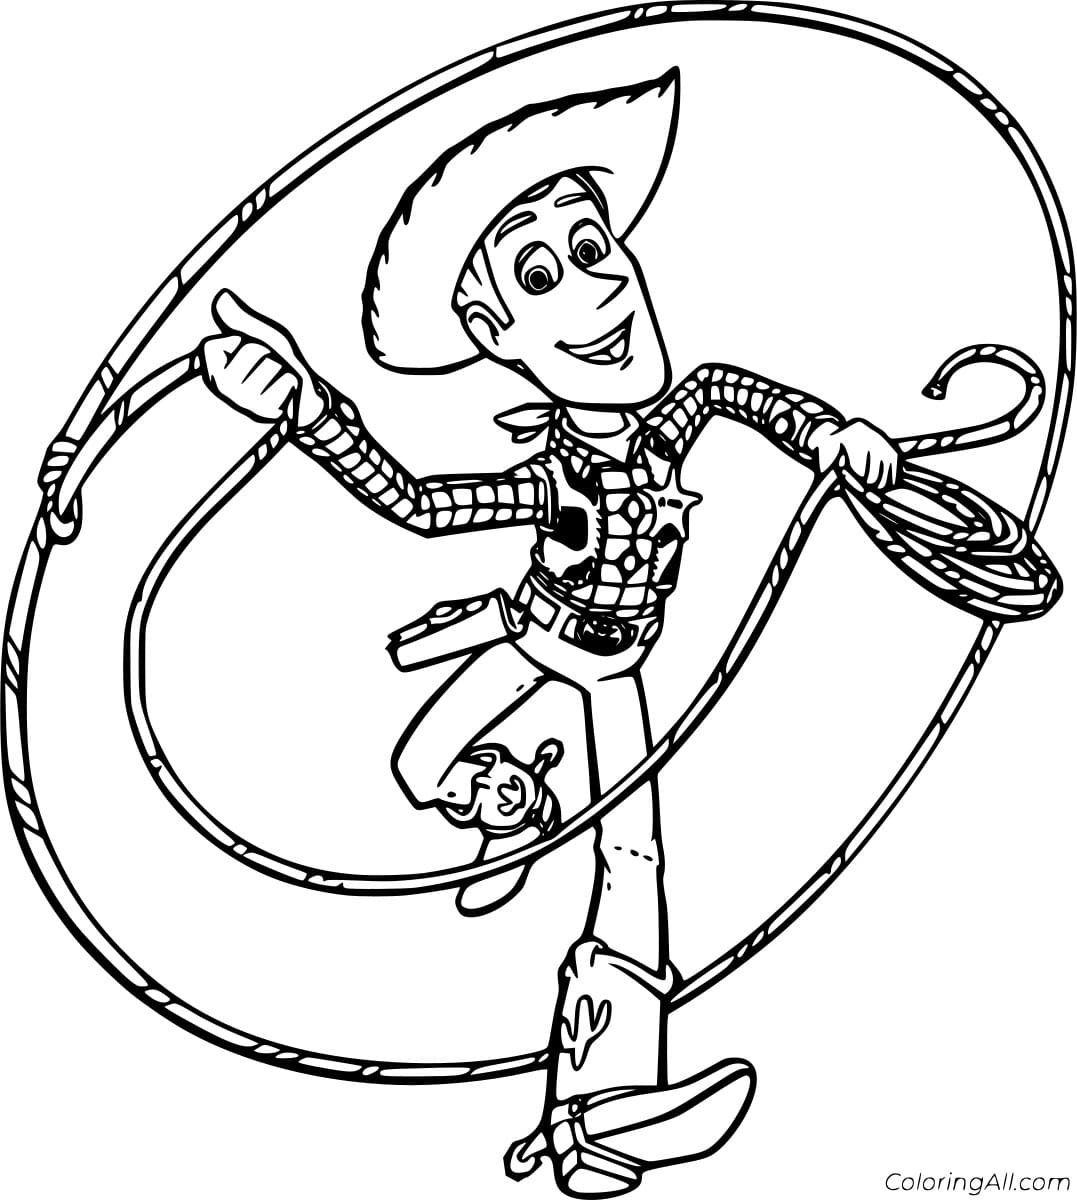 Woody Uses Lasso Coloring Page